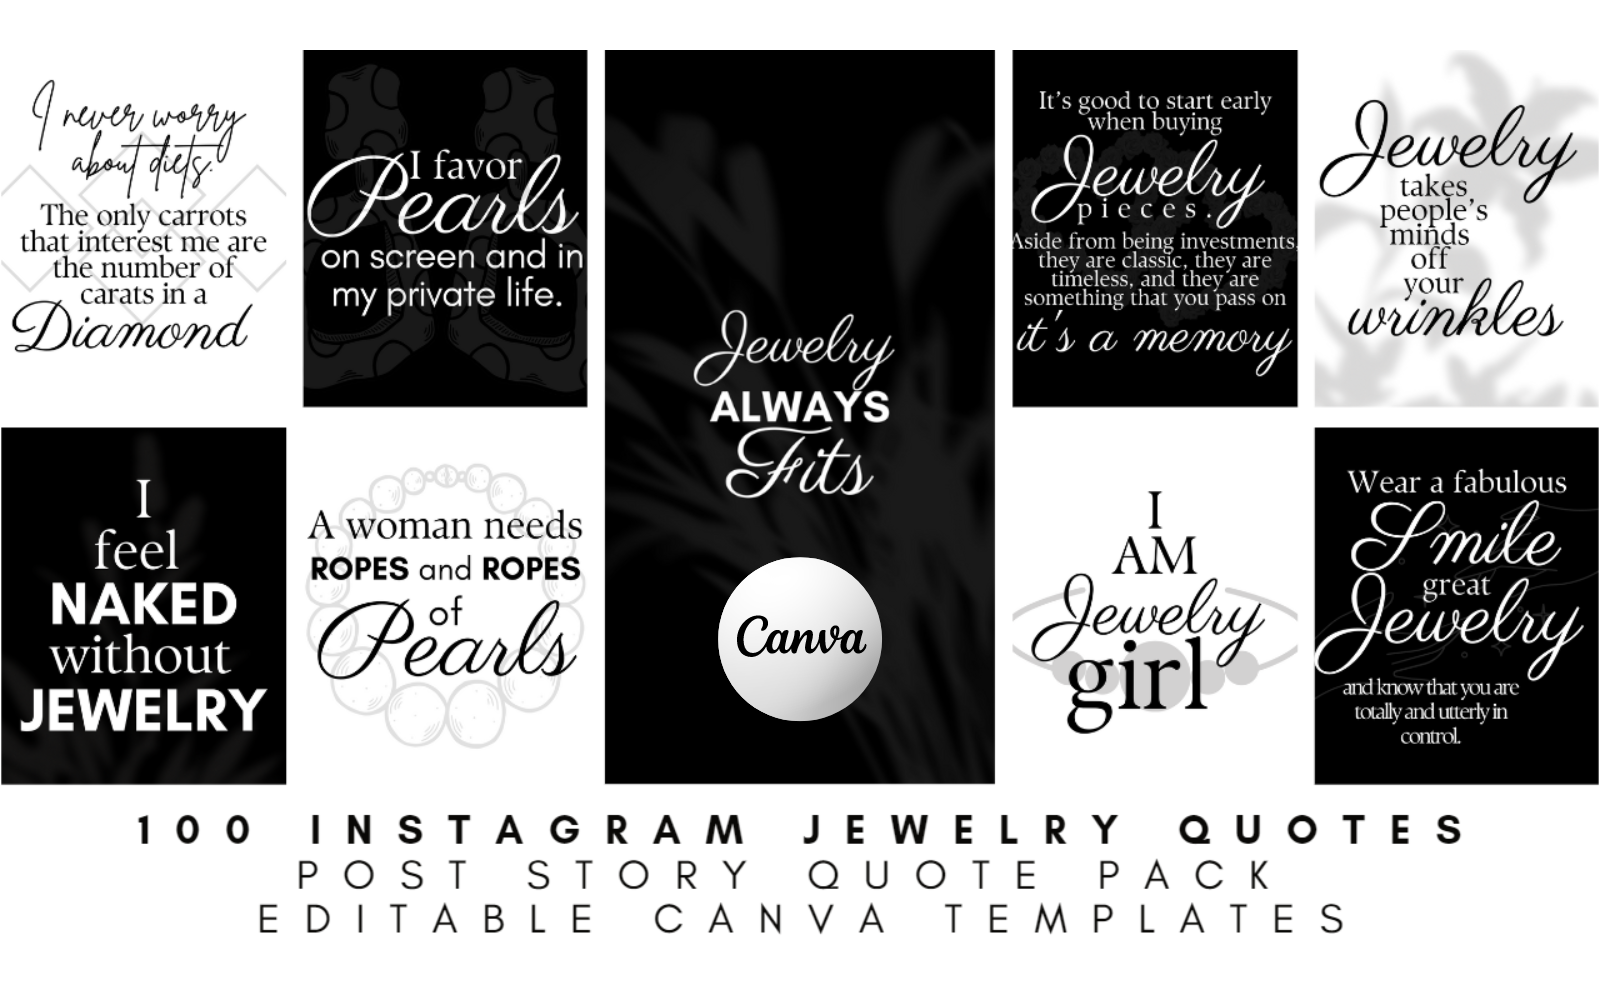 100 Instagram Jewelry Quotes | 400 Canva Editable Templates | Post & Story Pack